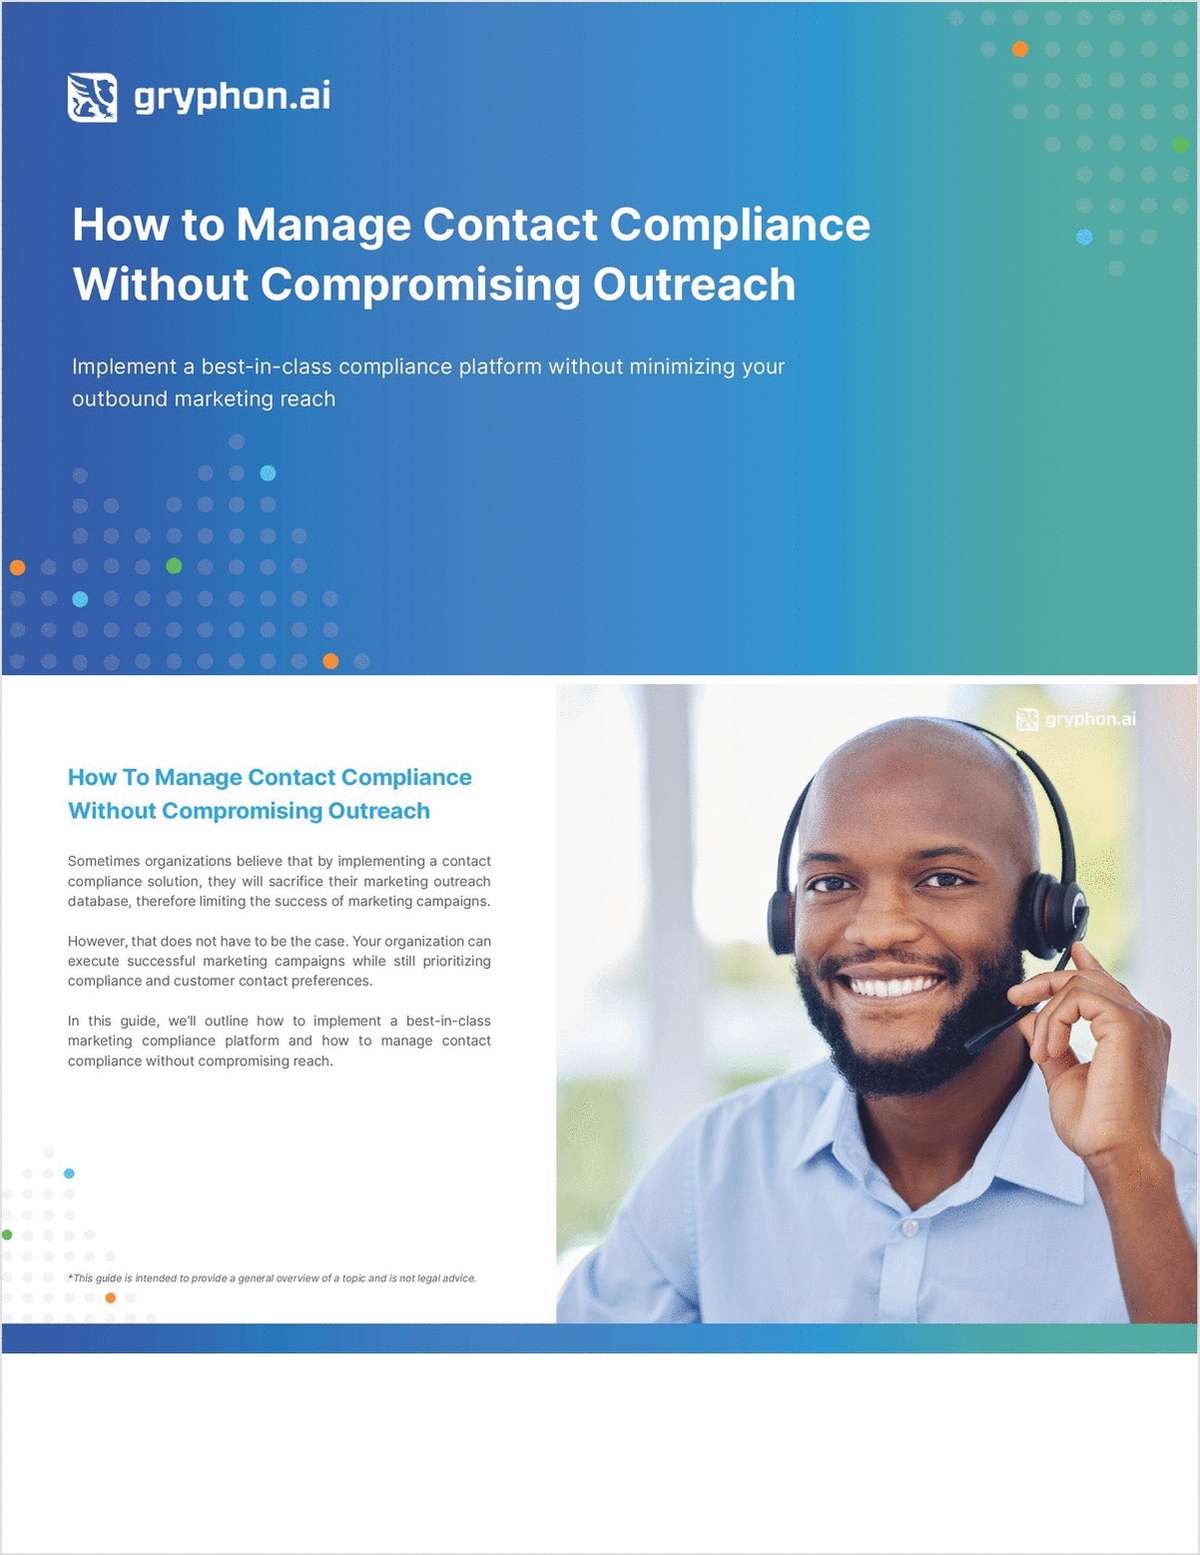 How to Manage Contact Compliance Without Compromising Outreach link